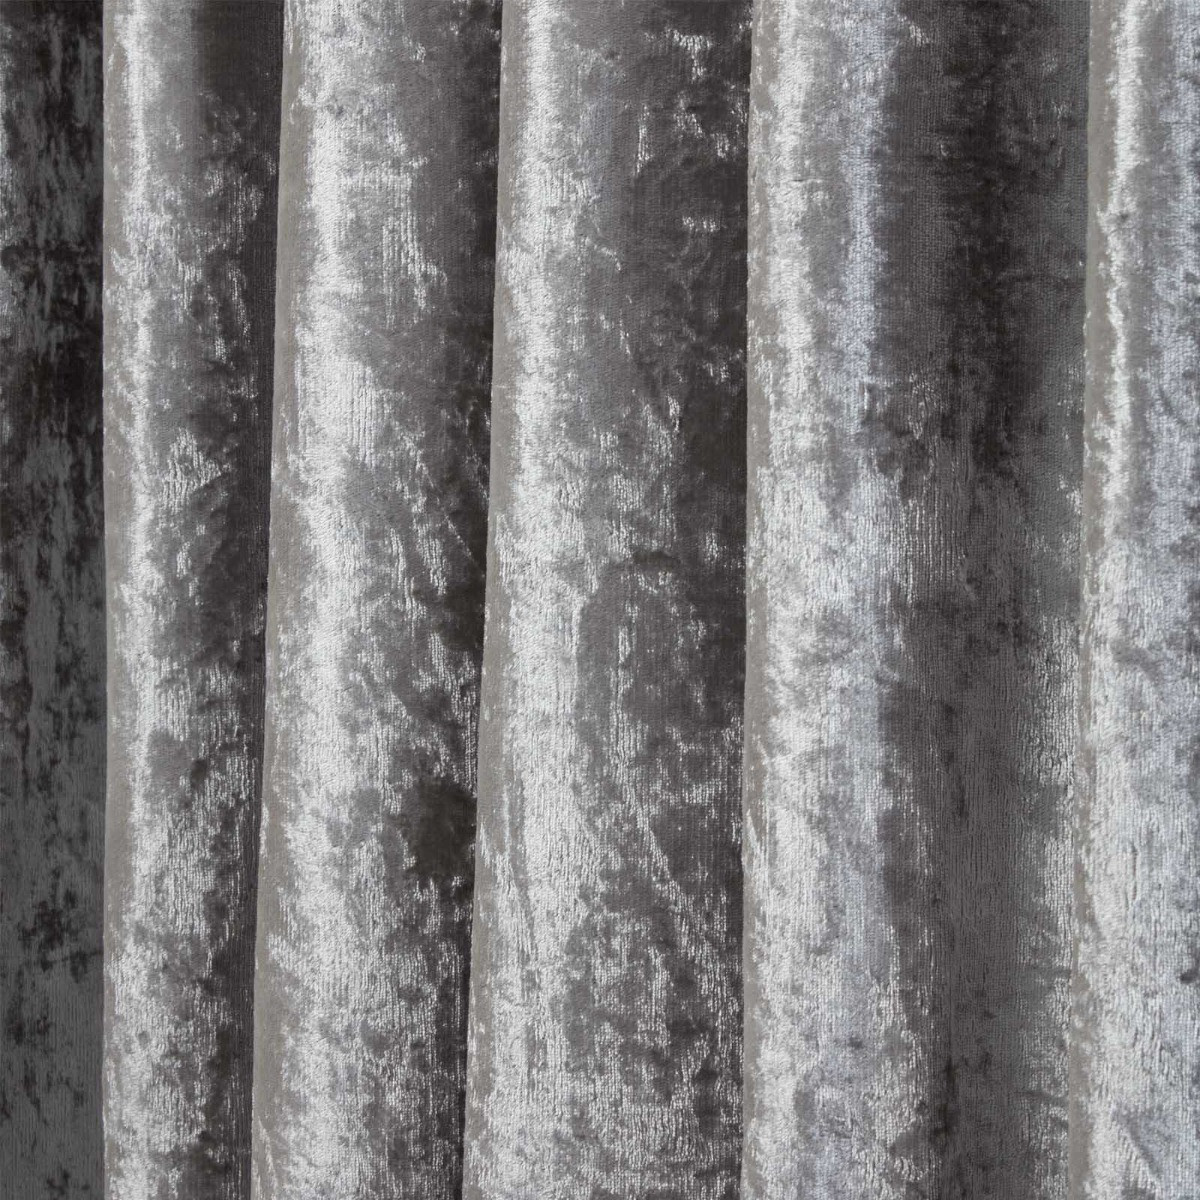 Sienna Crushed Velvet Pencil Pleat Curtains - Silver>